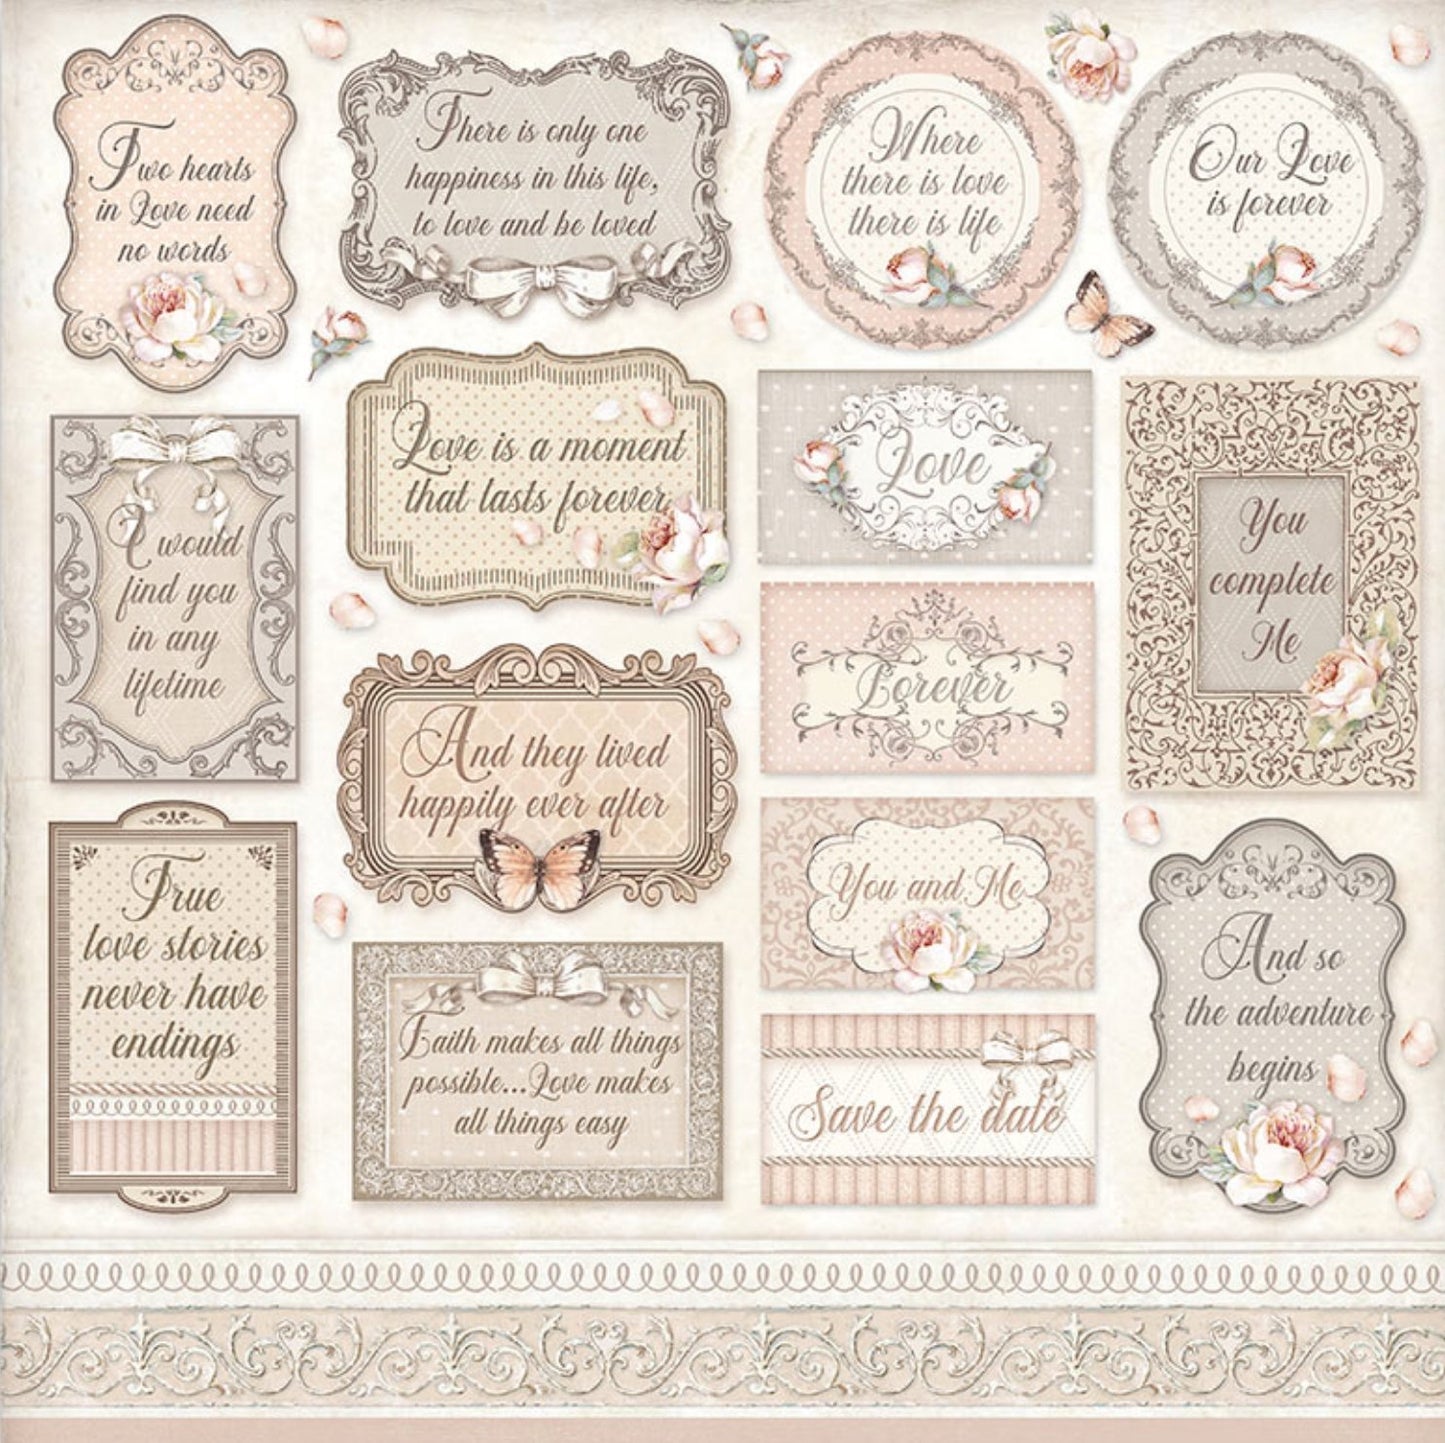 Stamperia - Scrapbooking Small Pad 10 sheets cm 20,3X20,3 (8"X8") - You and Me Stamperia